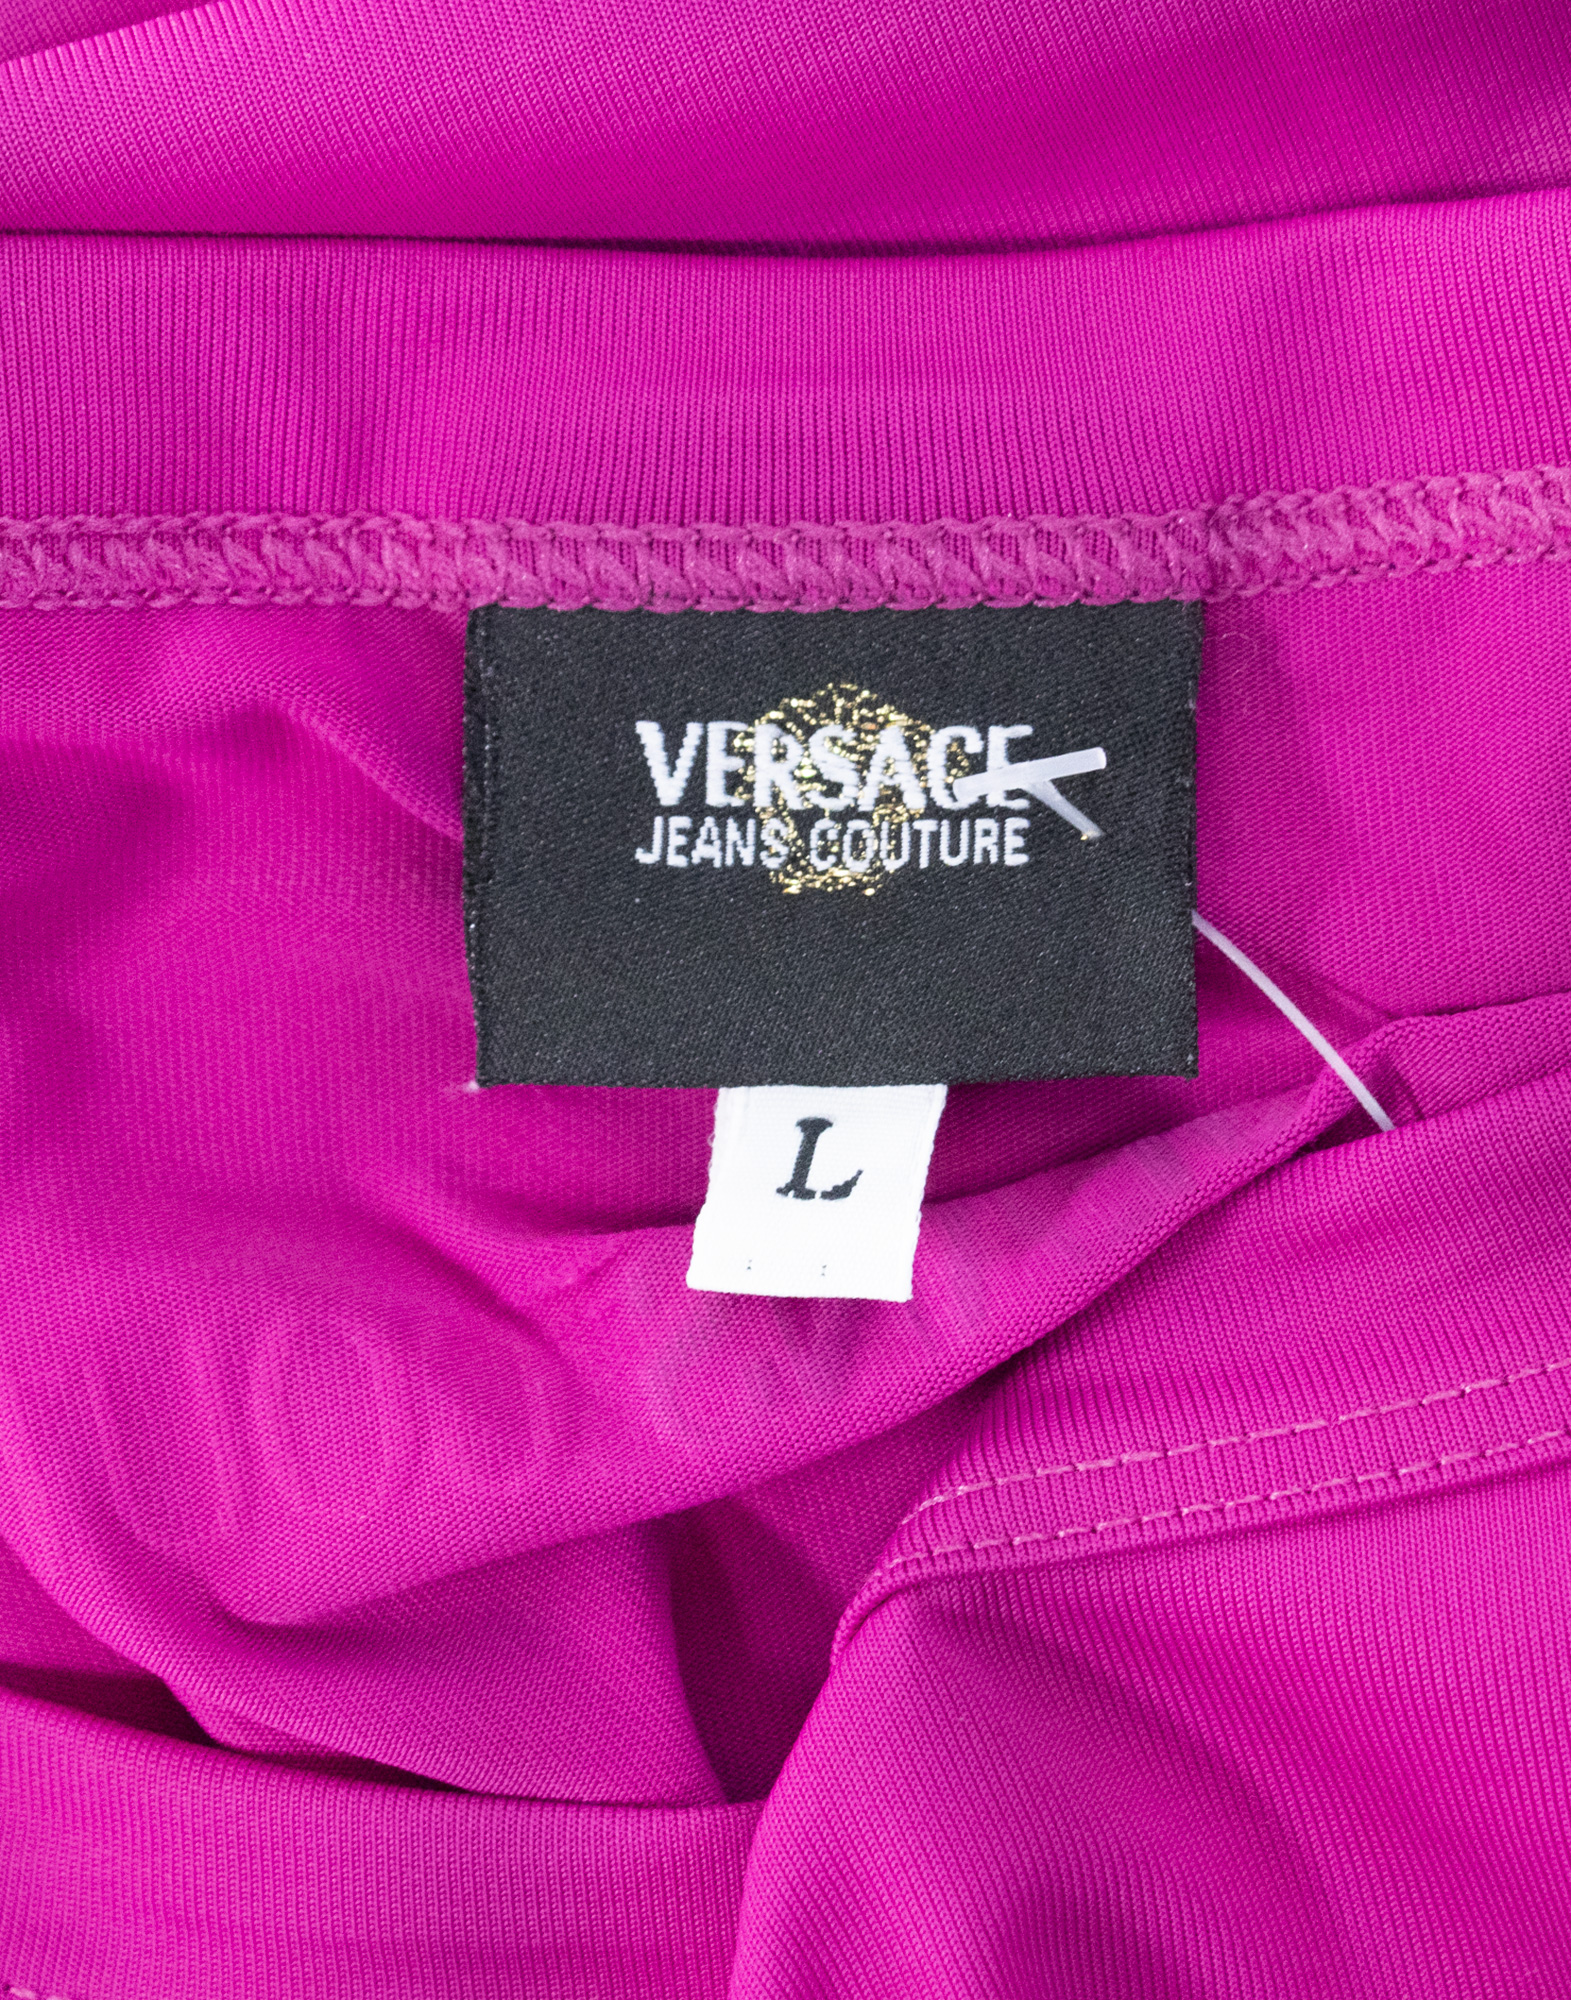 Versace Jeans Couture - Stretch pink and fuchsia t-shirt